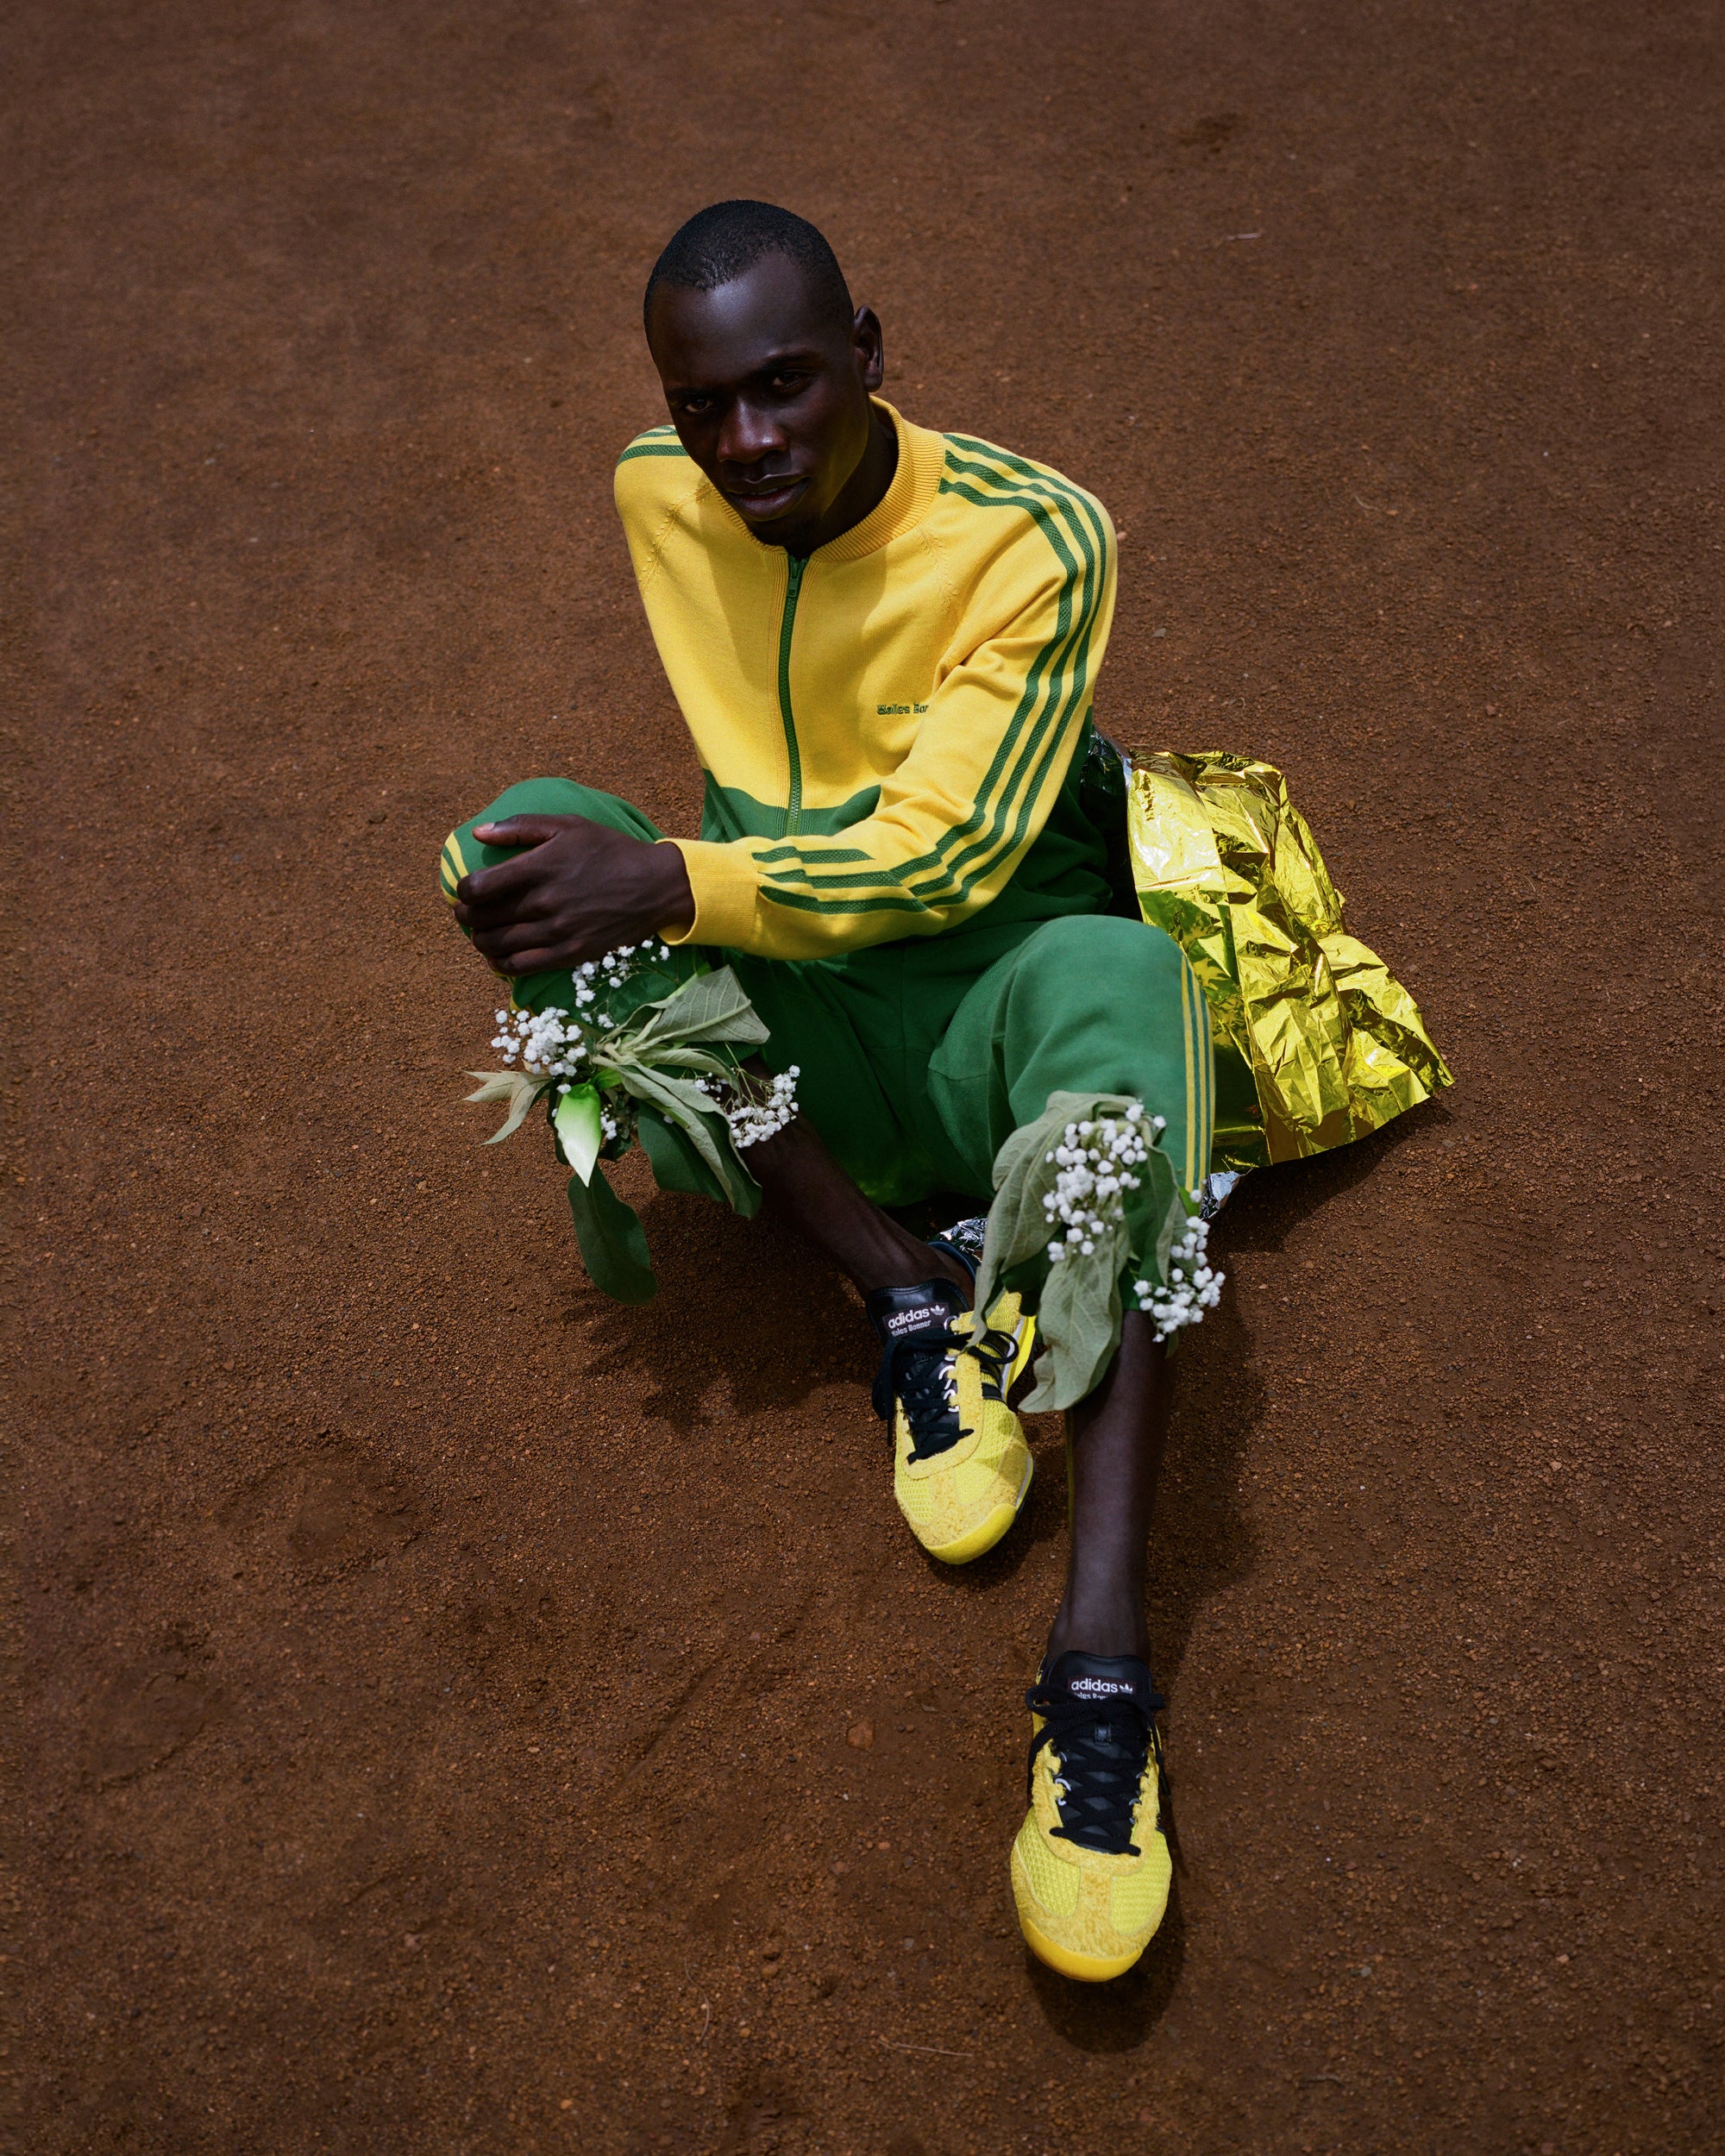 ADIDAS ORIGINALS BY WALES BONNER SS24 COLLECTION